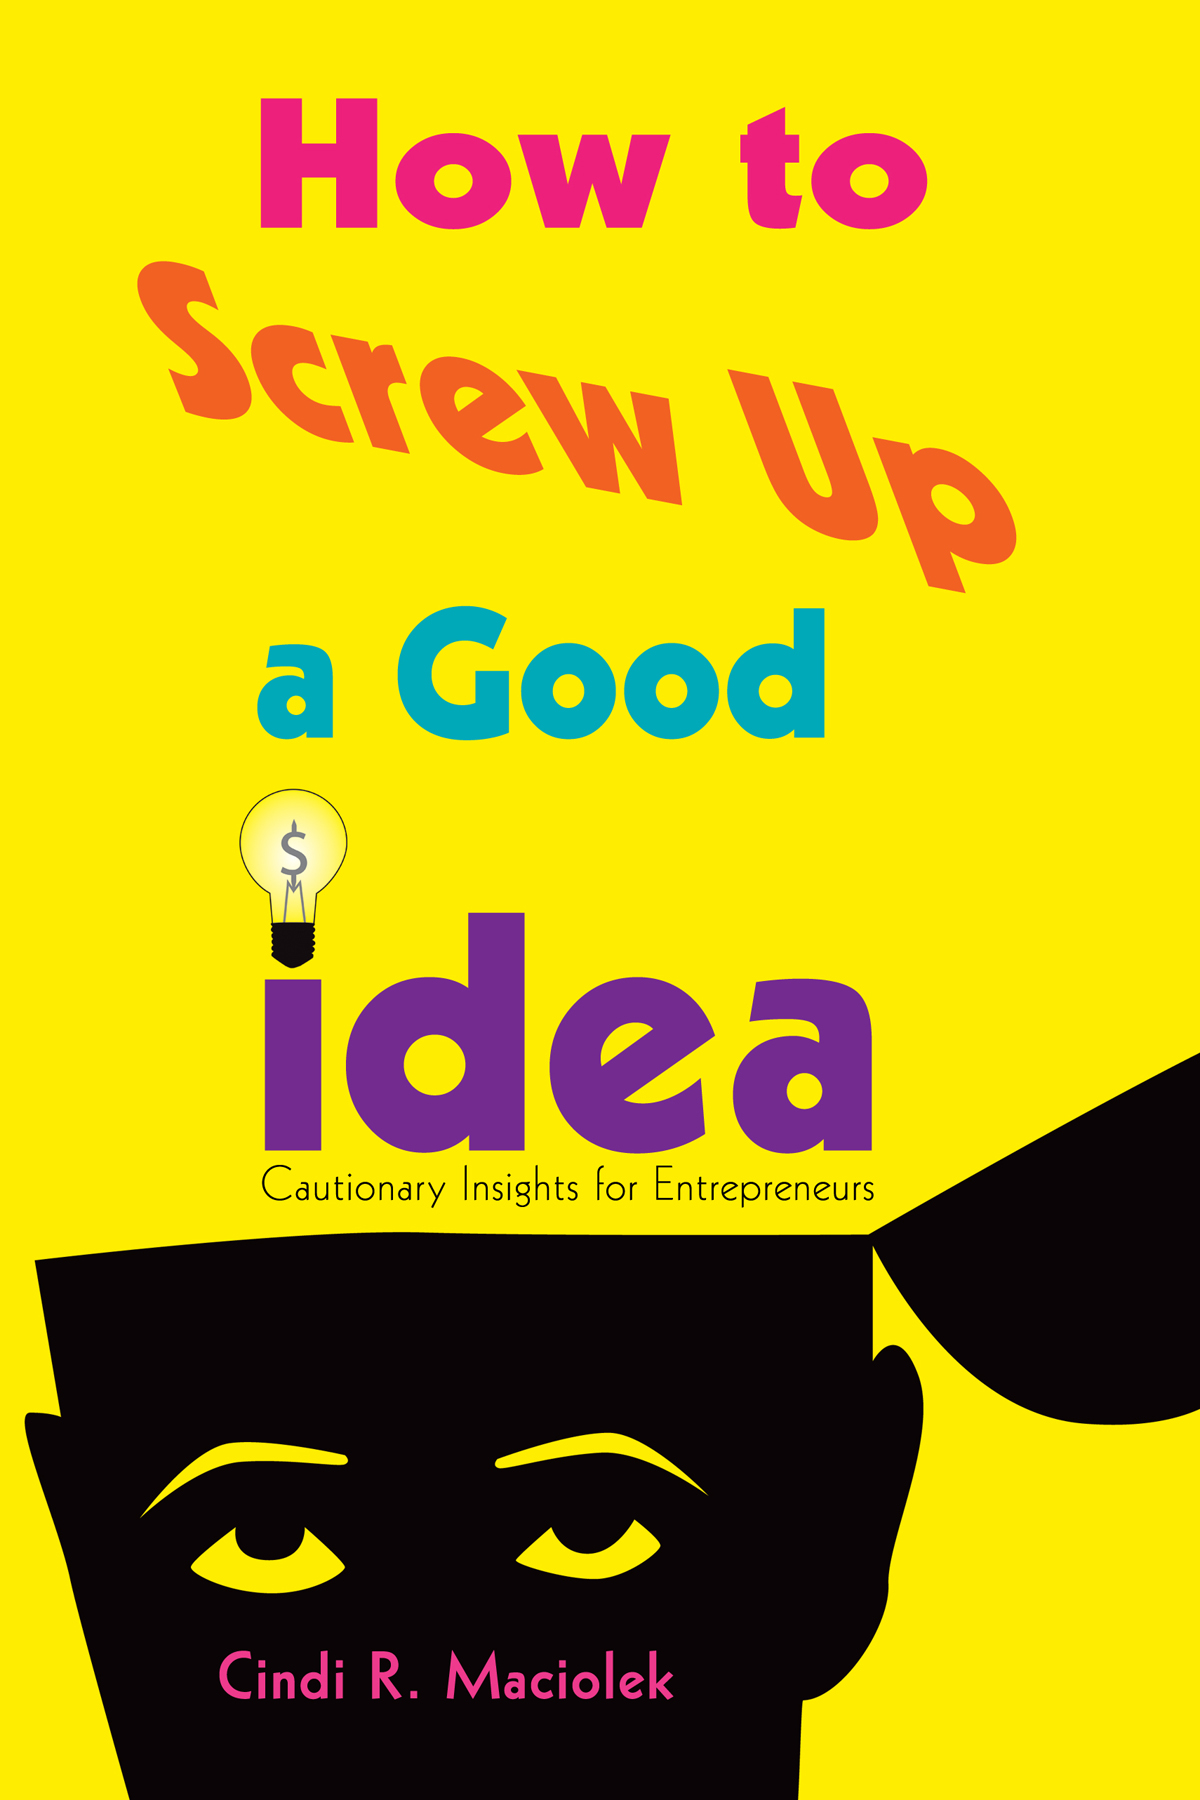 How to Screw Up a Good Idea